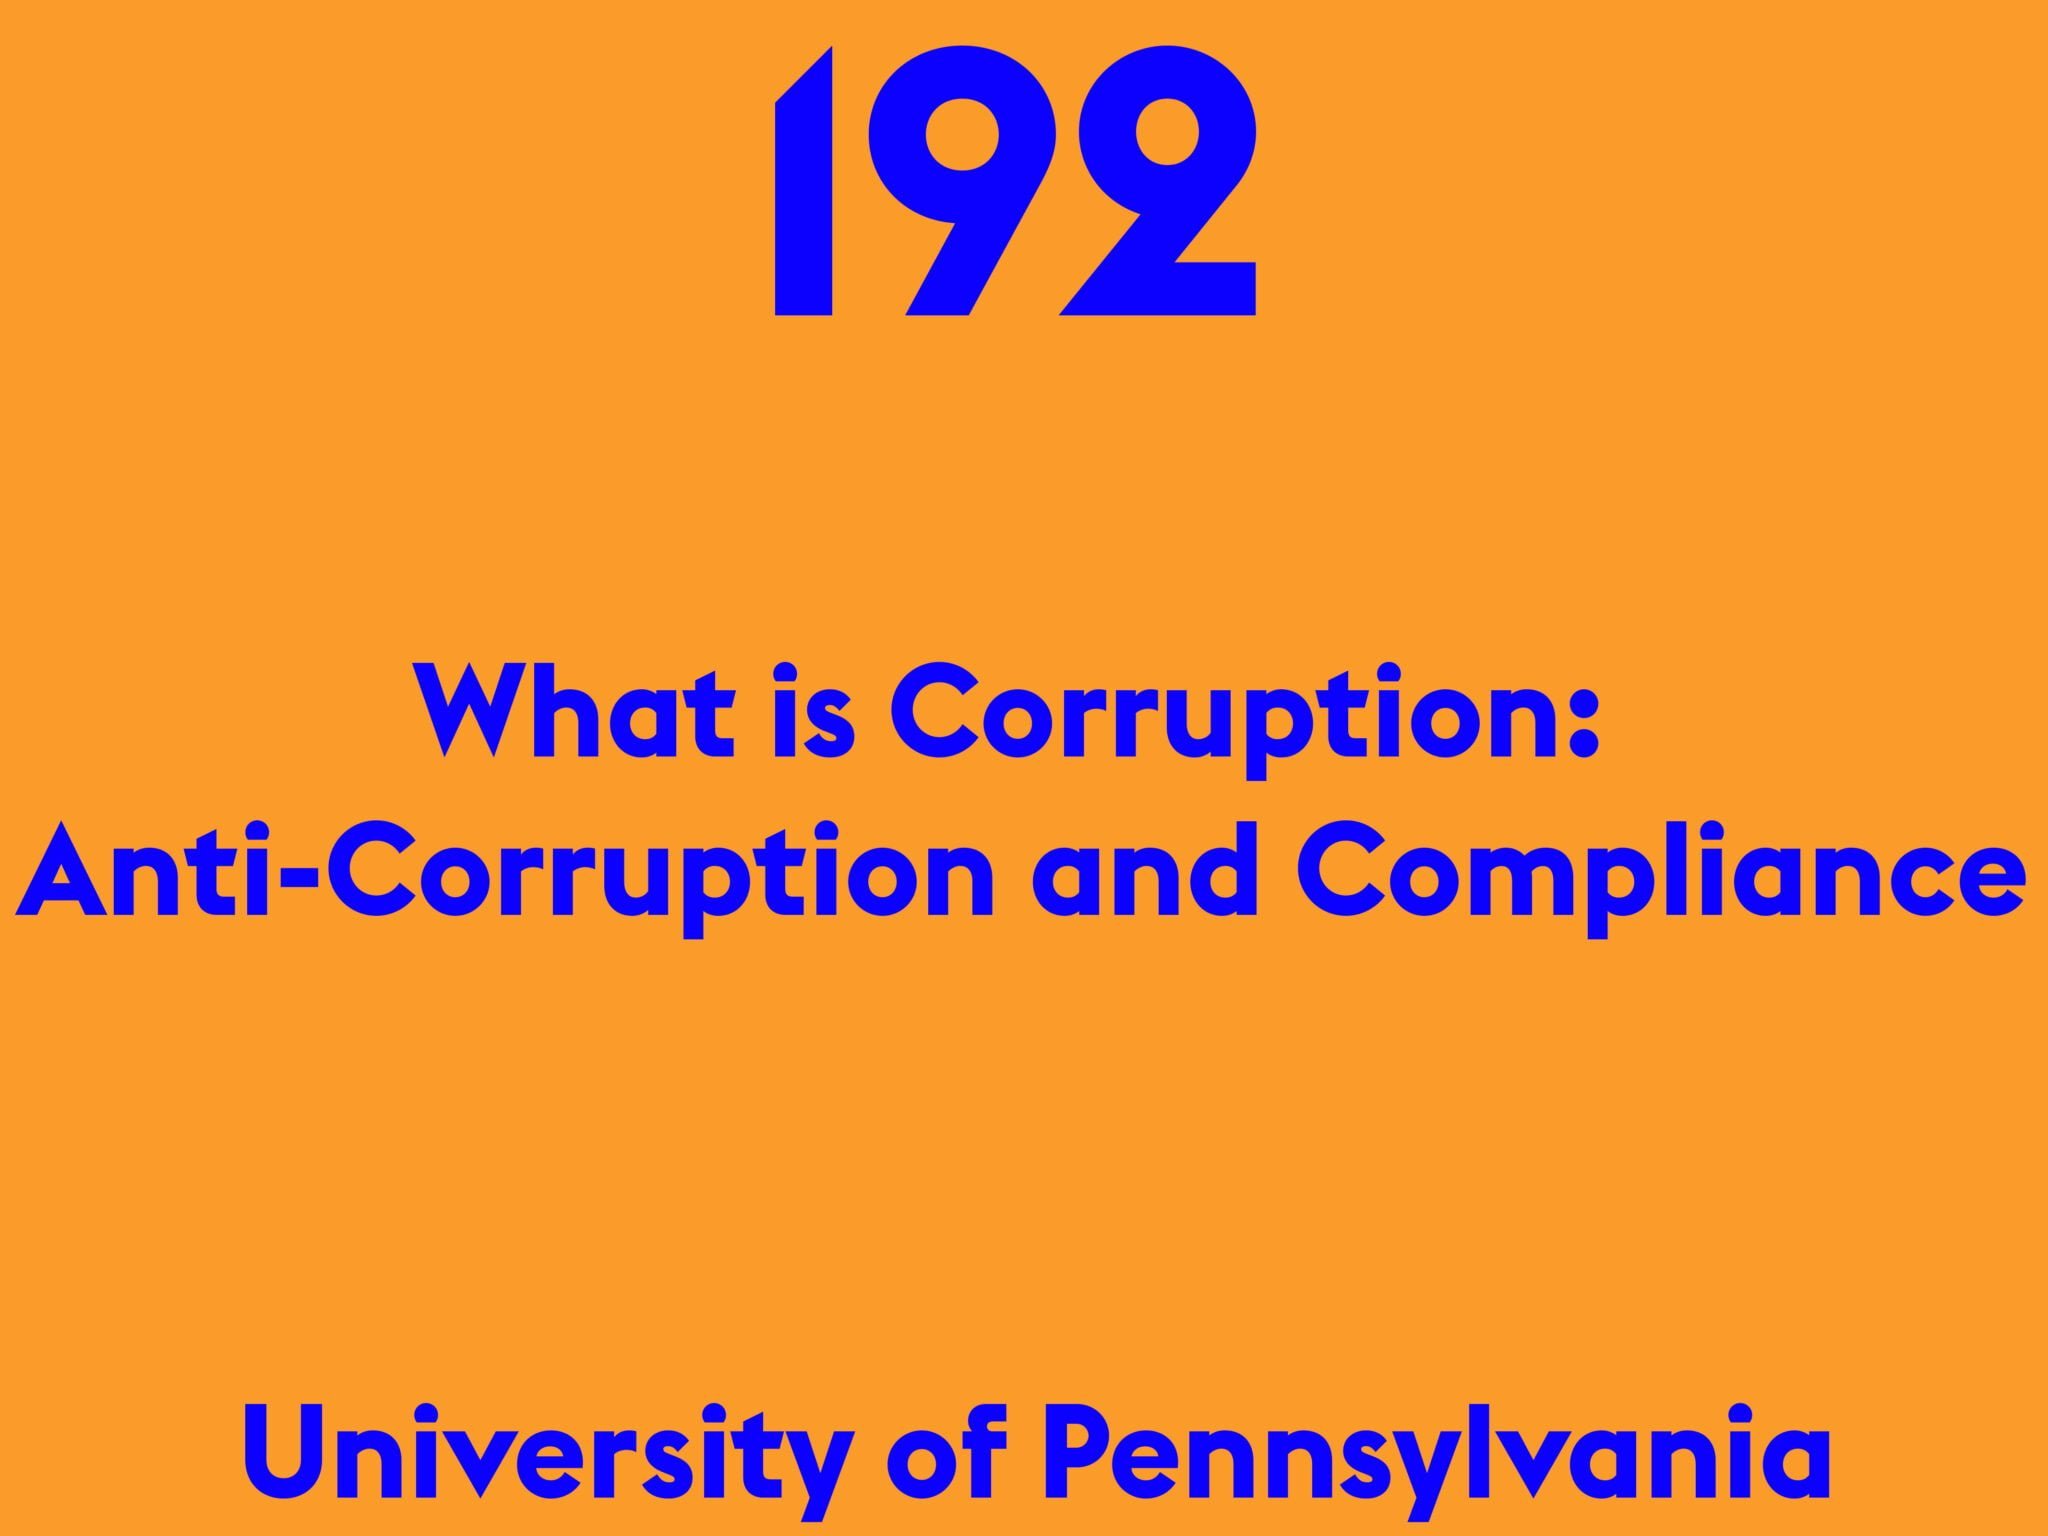 What is Corruption: Anti-Corruption and Compliance